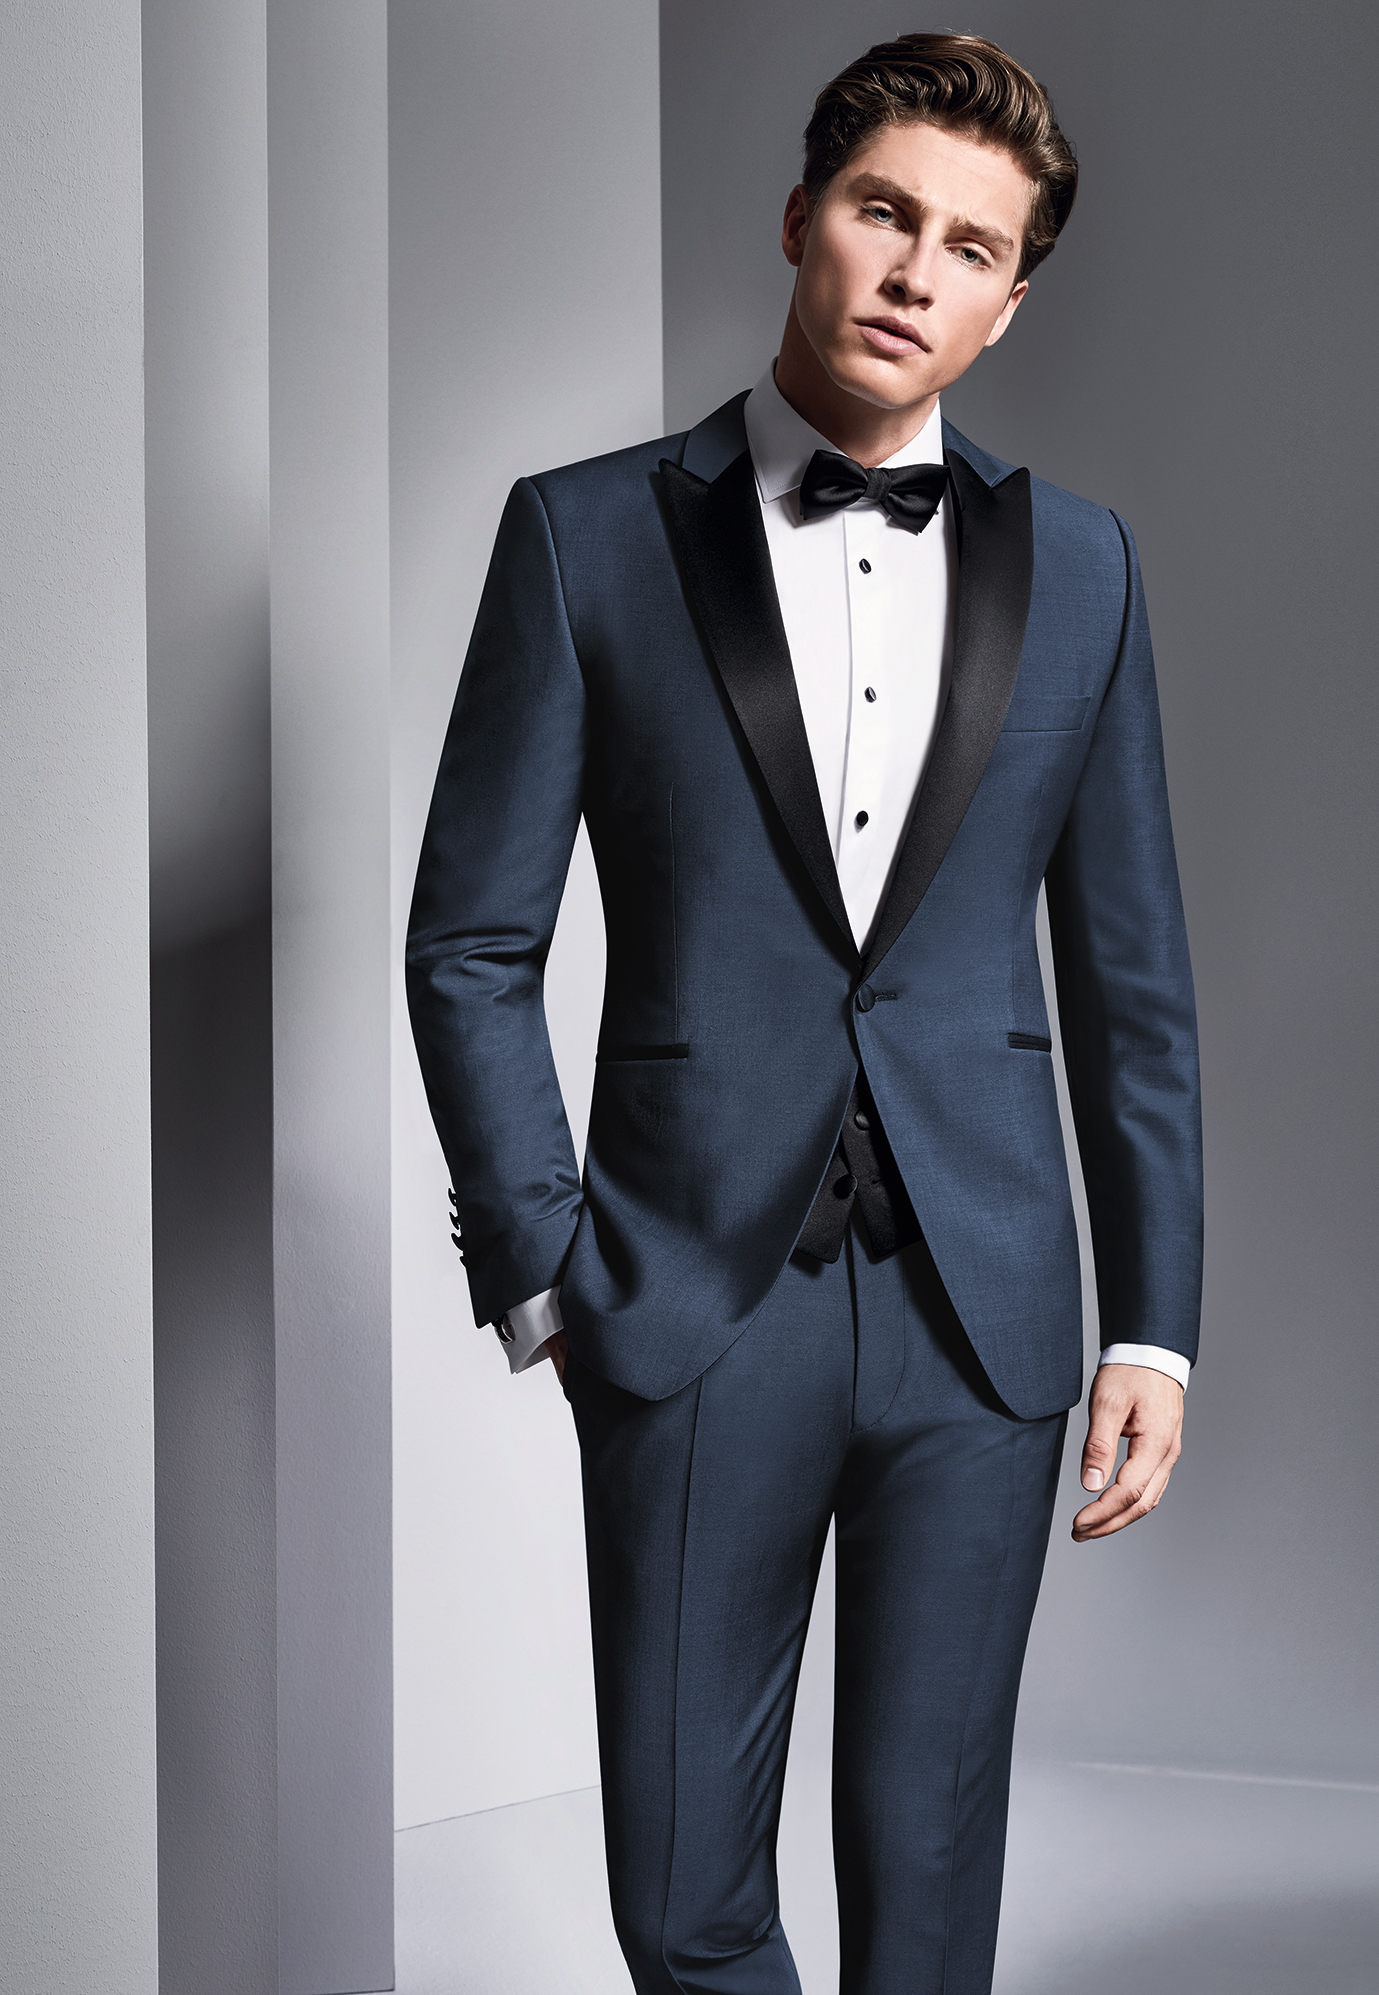 Is it Morning or Mourning Suit Tuxedo? – RobertGeller-ny